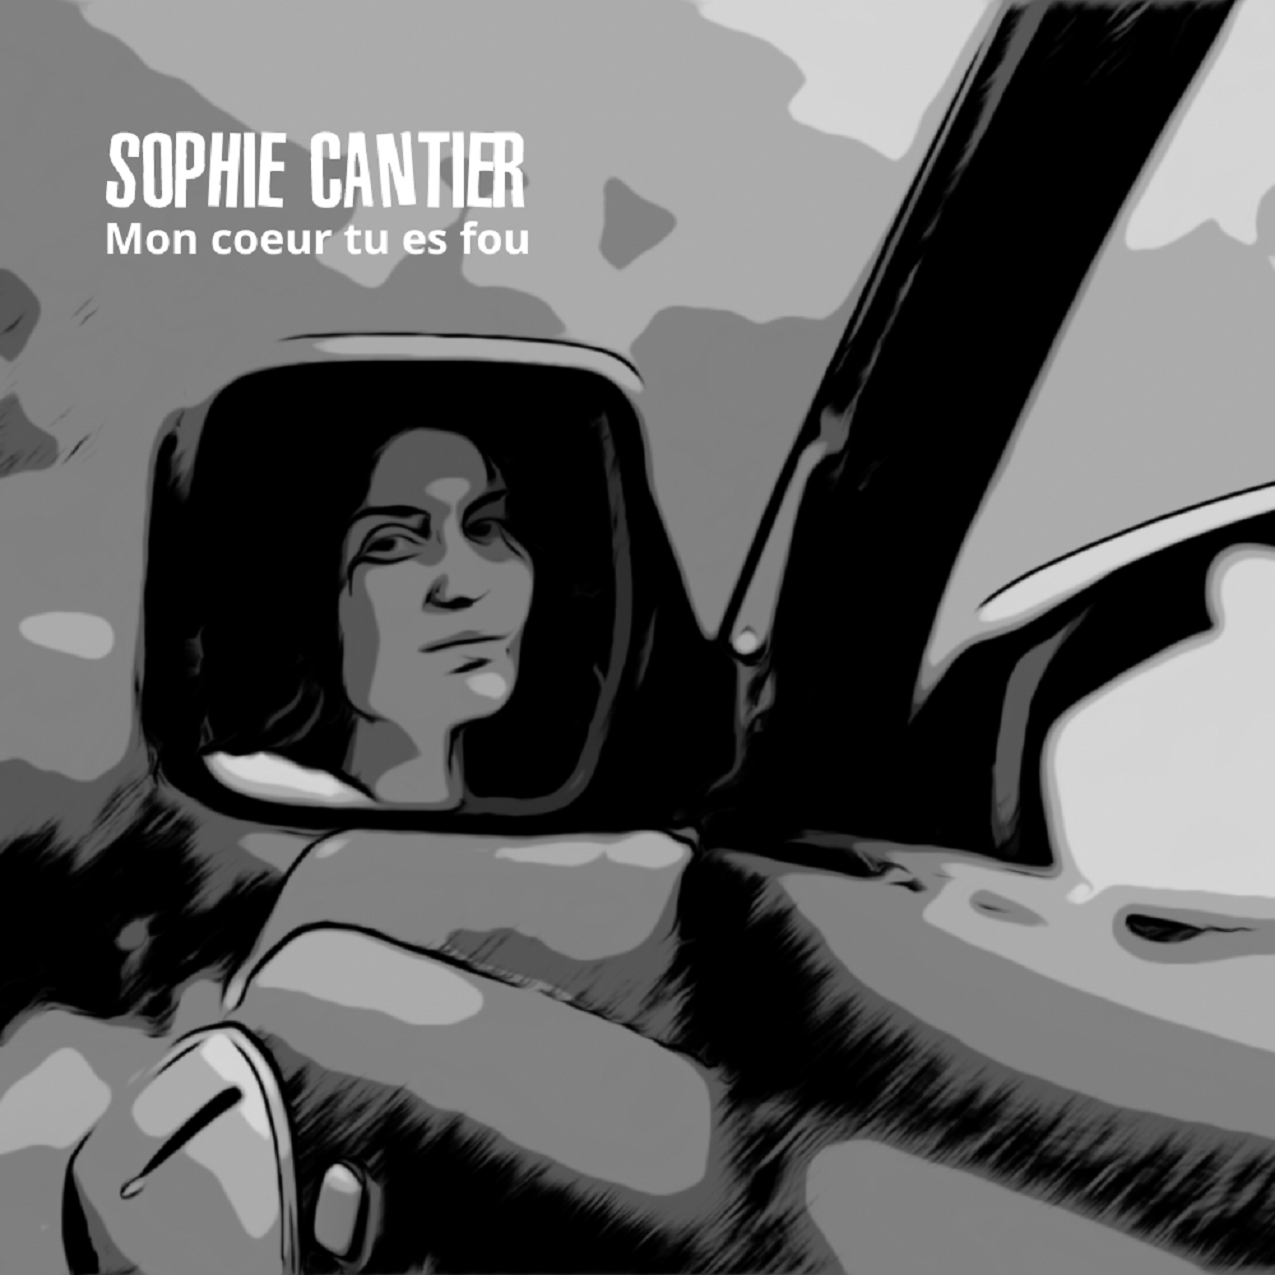 New Discoveries – Sophie Cantier’s Music